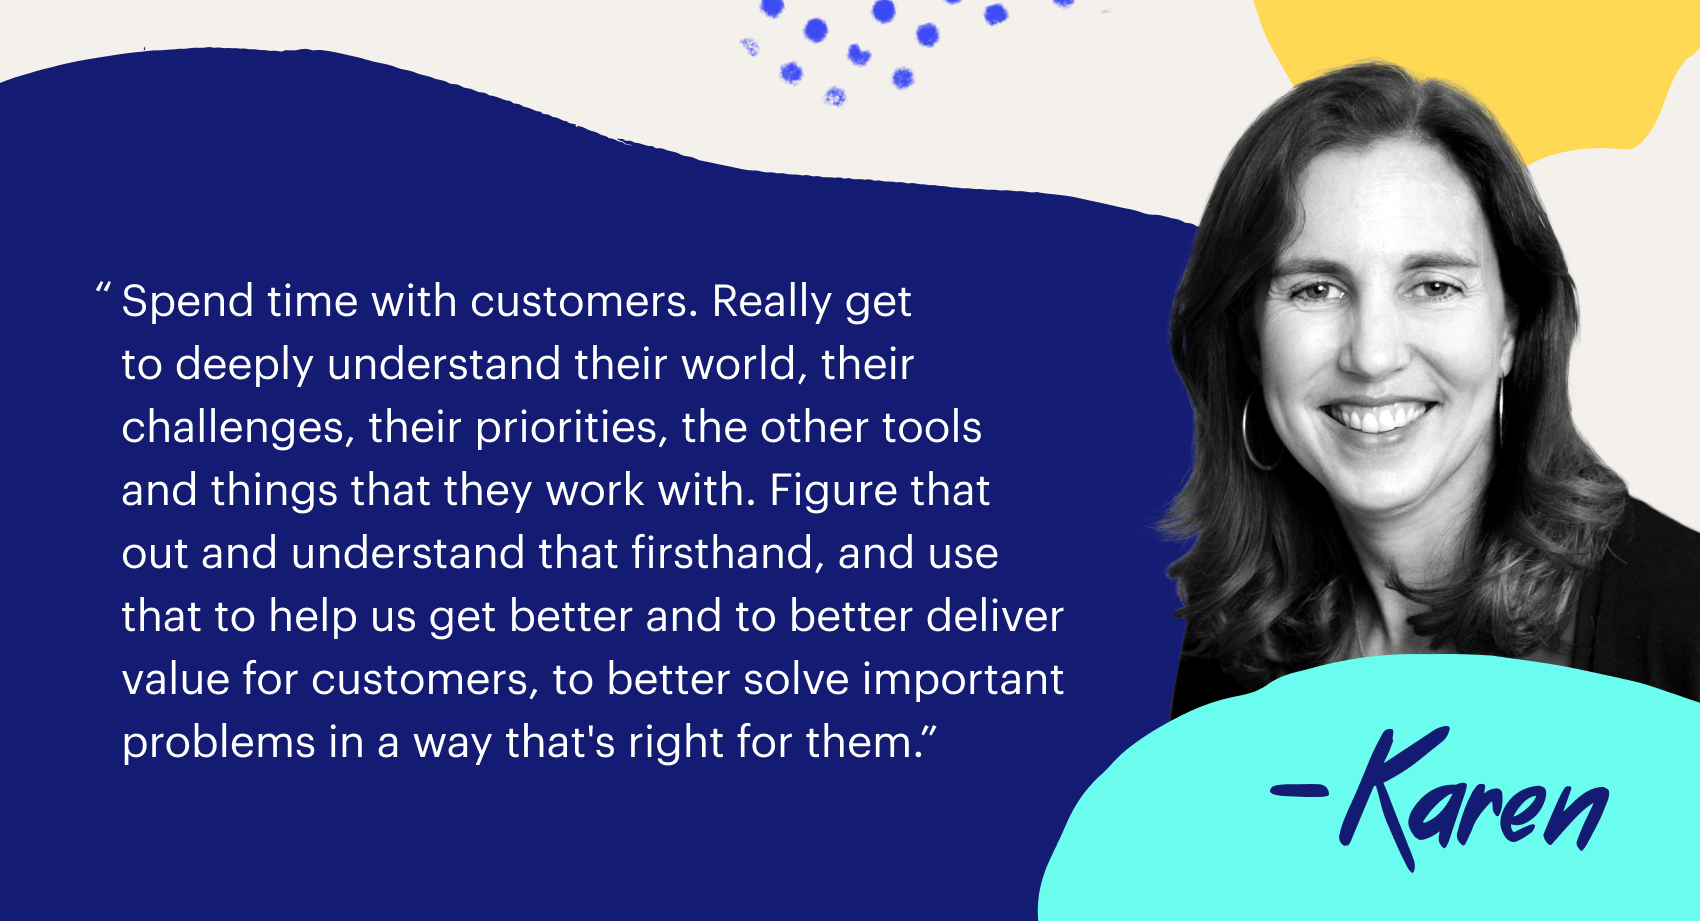 "Spend time with customers. Really get to deeplu understand their world, their challenges, their priorities, the other tools and things that they work with. Figure that out and understand that firsthand, and use that to help us get better and to better deliver value for customers, to better solve important problems in a way that's right for them"